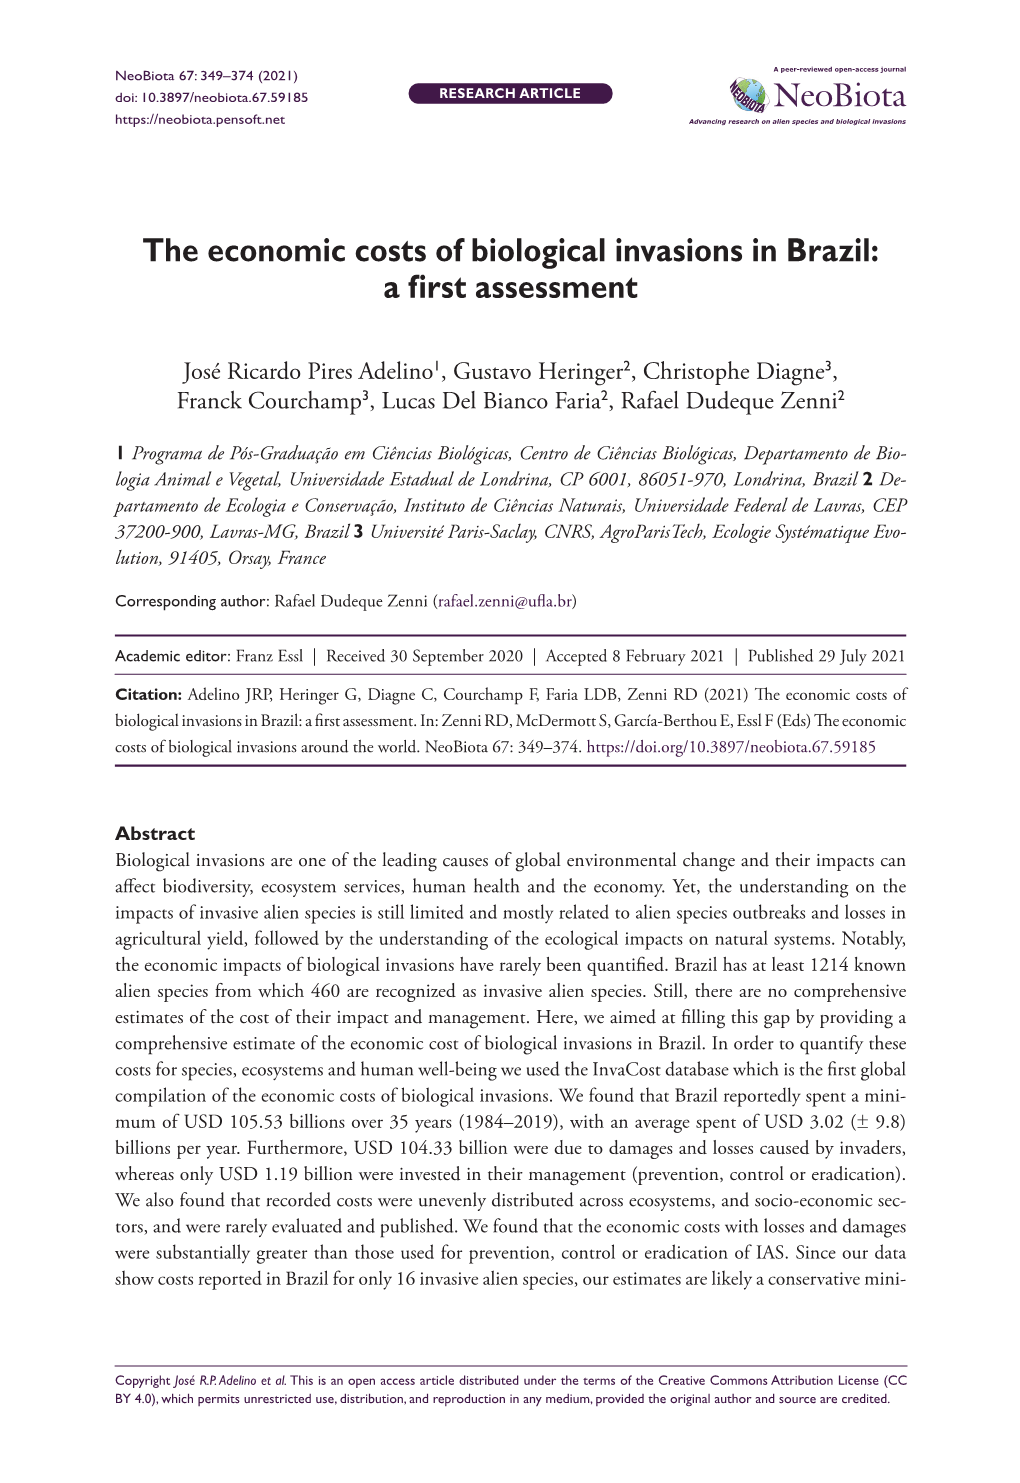 The Economic Costs of Biological Invasions in Brazil: a First Assessment